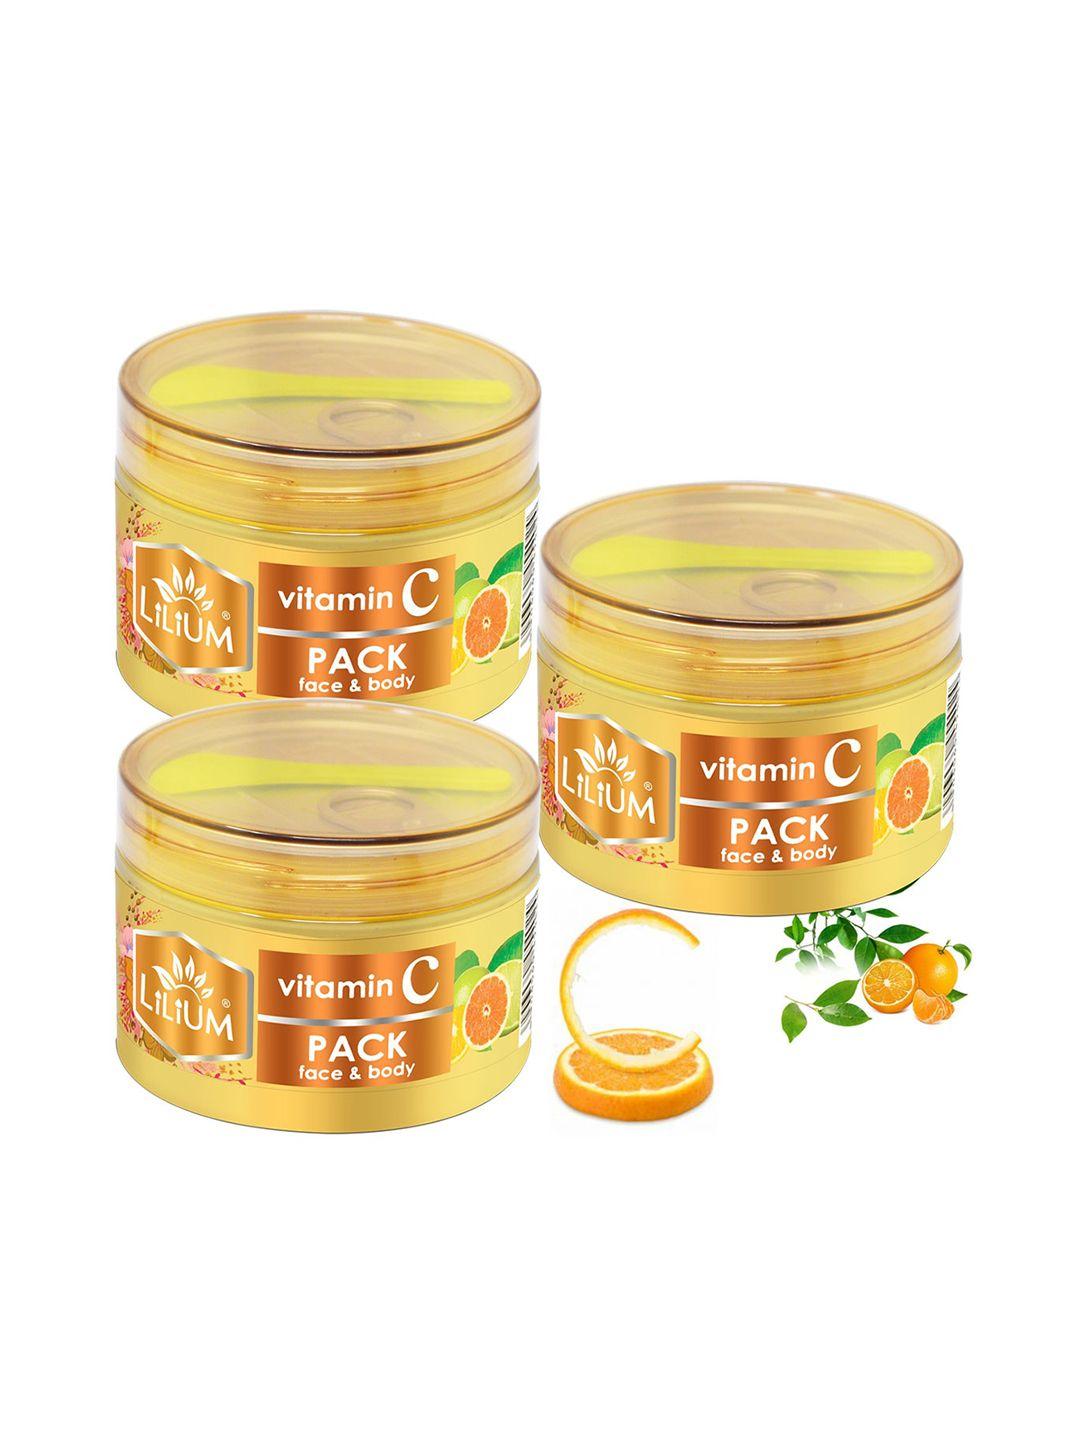 lilium pack of 3 vitamin c face pack with aloevera and fruit extract